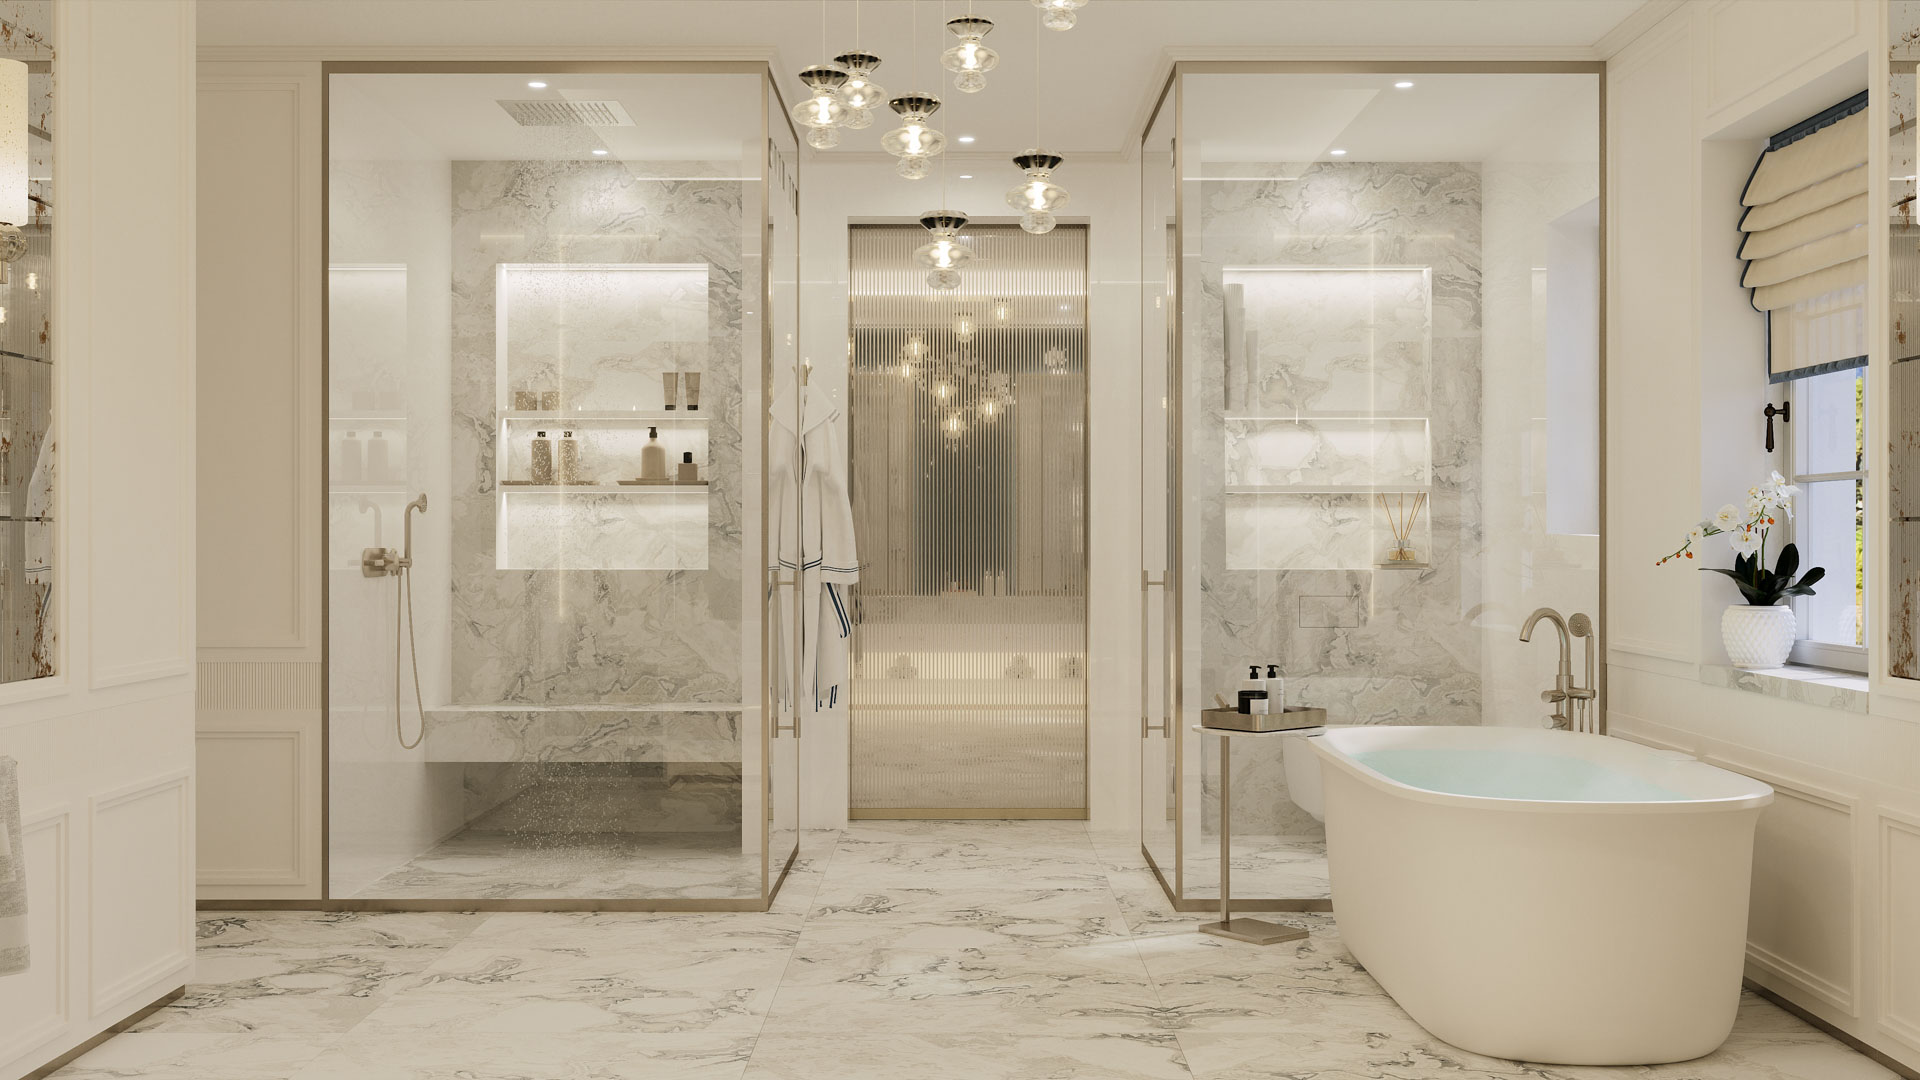 A spacious and luxurious bathroom featuring a freestanding bathtub, marble walls, a walk-in shower, and decorative pendant lights.